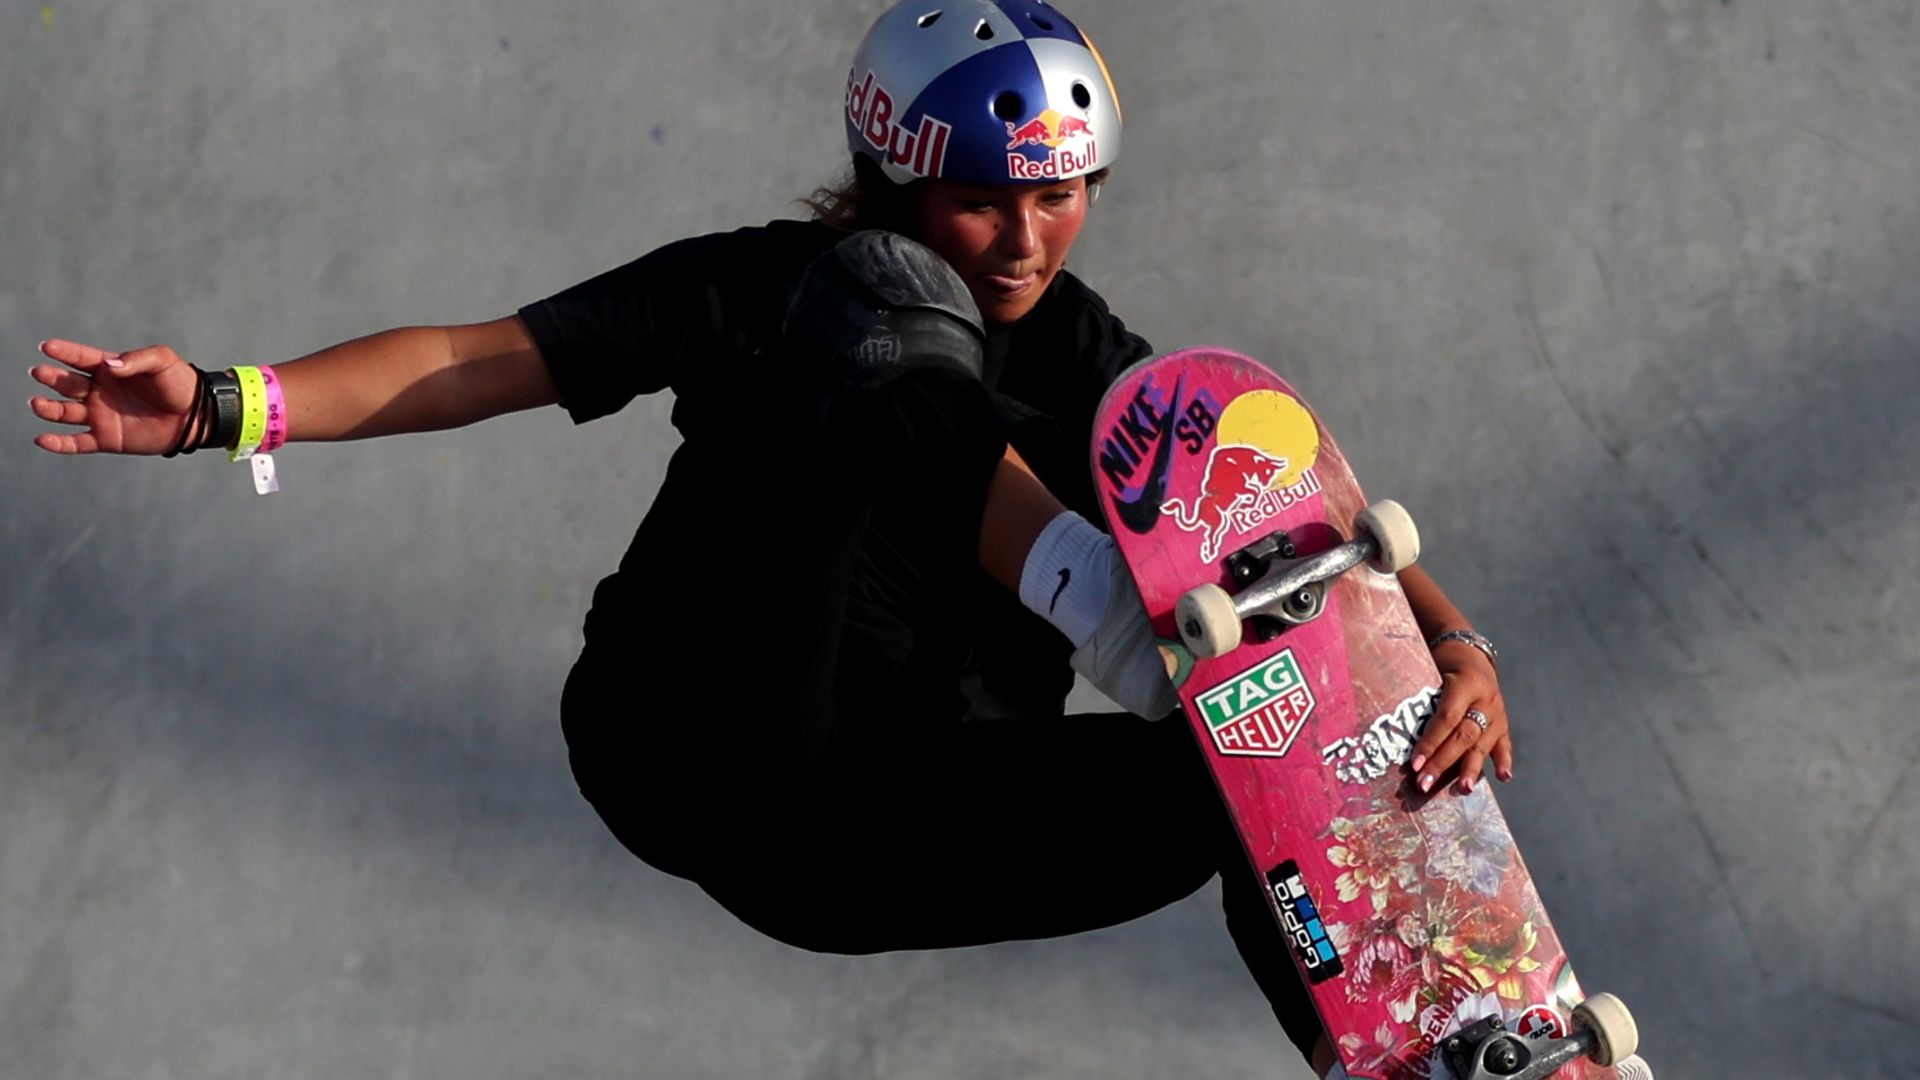 Brown, 14, becomes GB's first skateboarding world champion